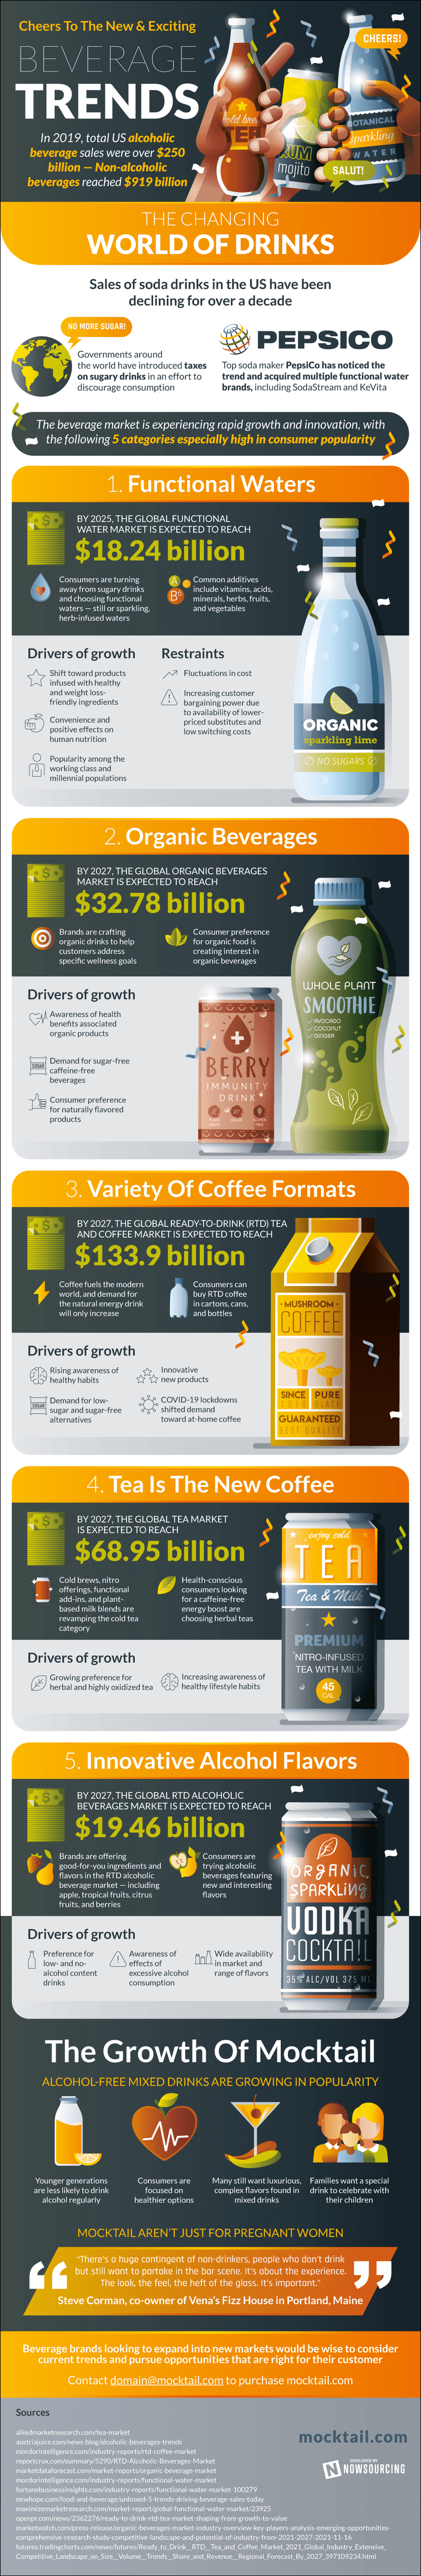 The 2022 Top 5 Beverage Trends Infographic